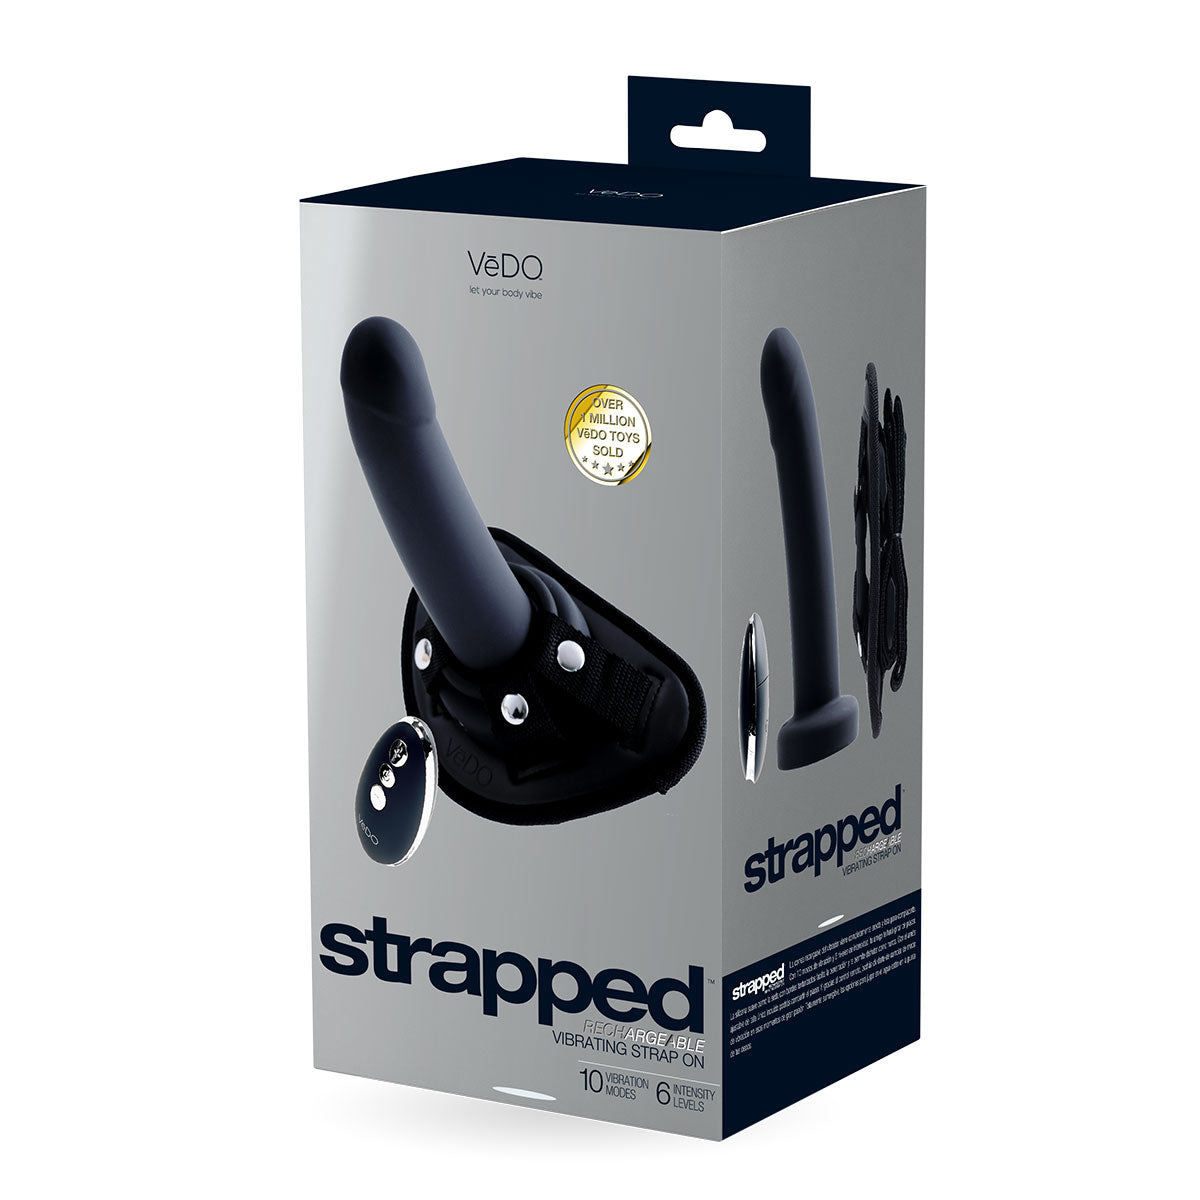 VeDO STRAPPED Rechargeable Vibrating Strap-On - Black Intimates Adult Boutique